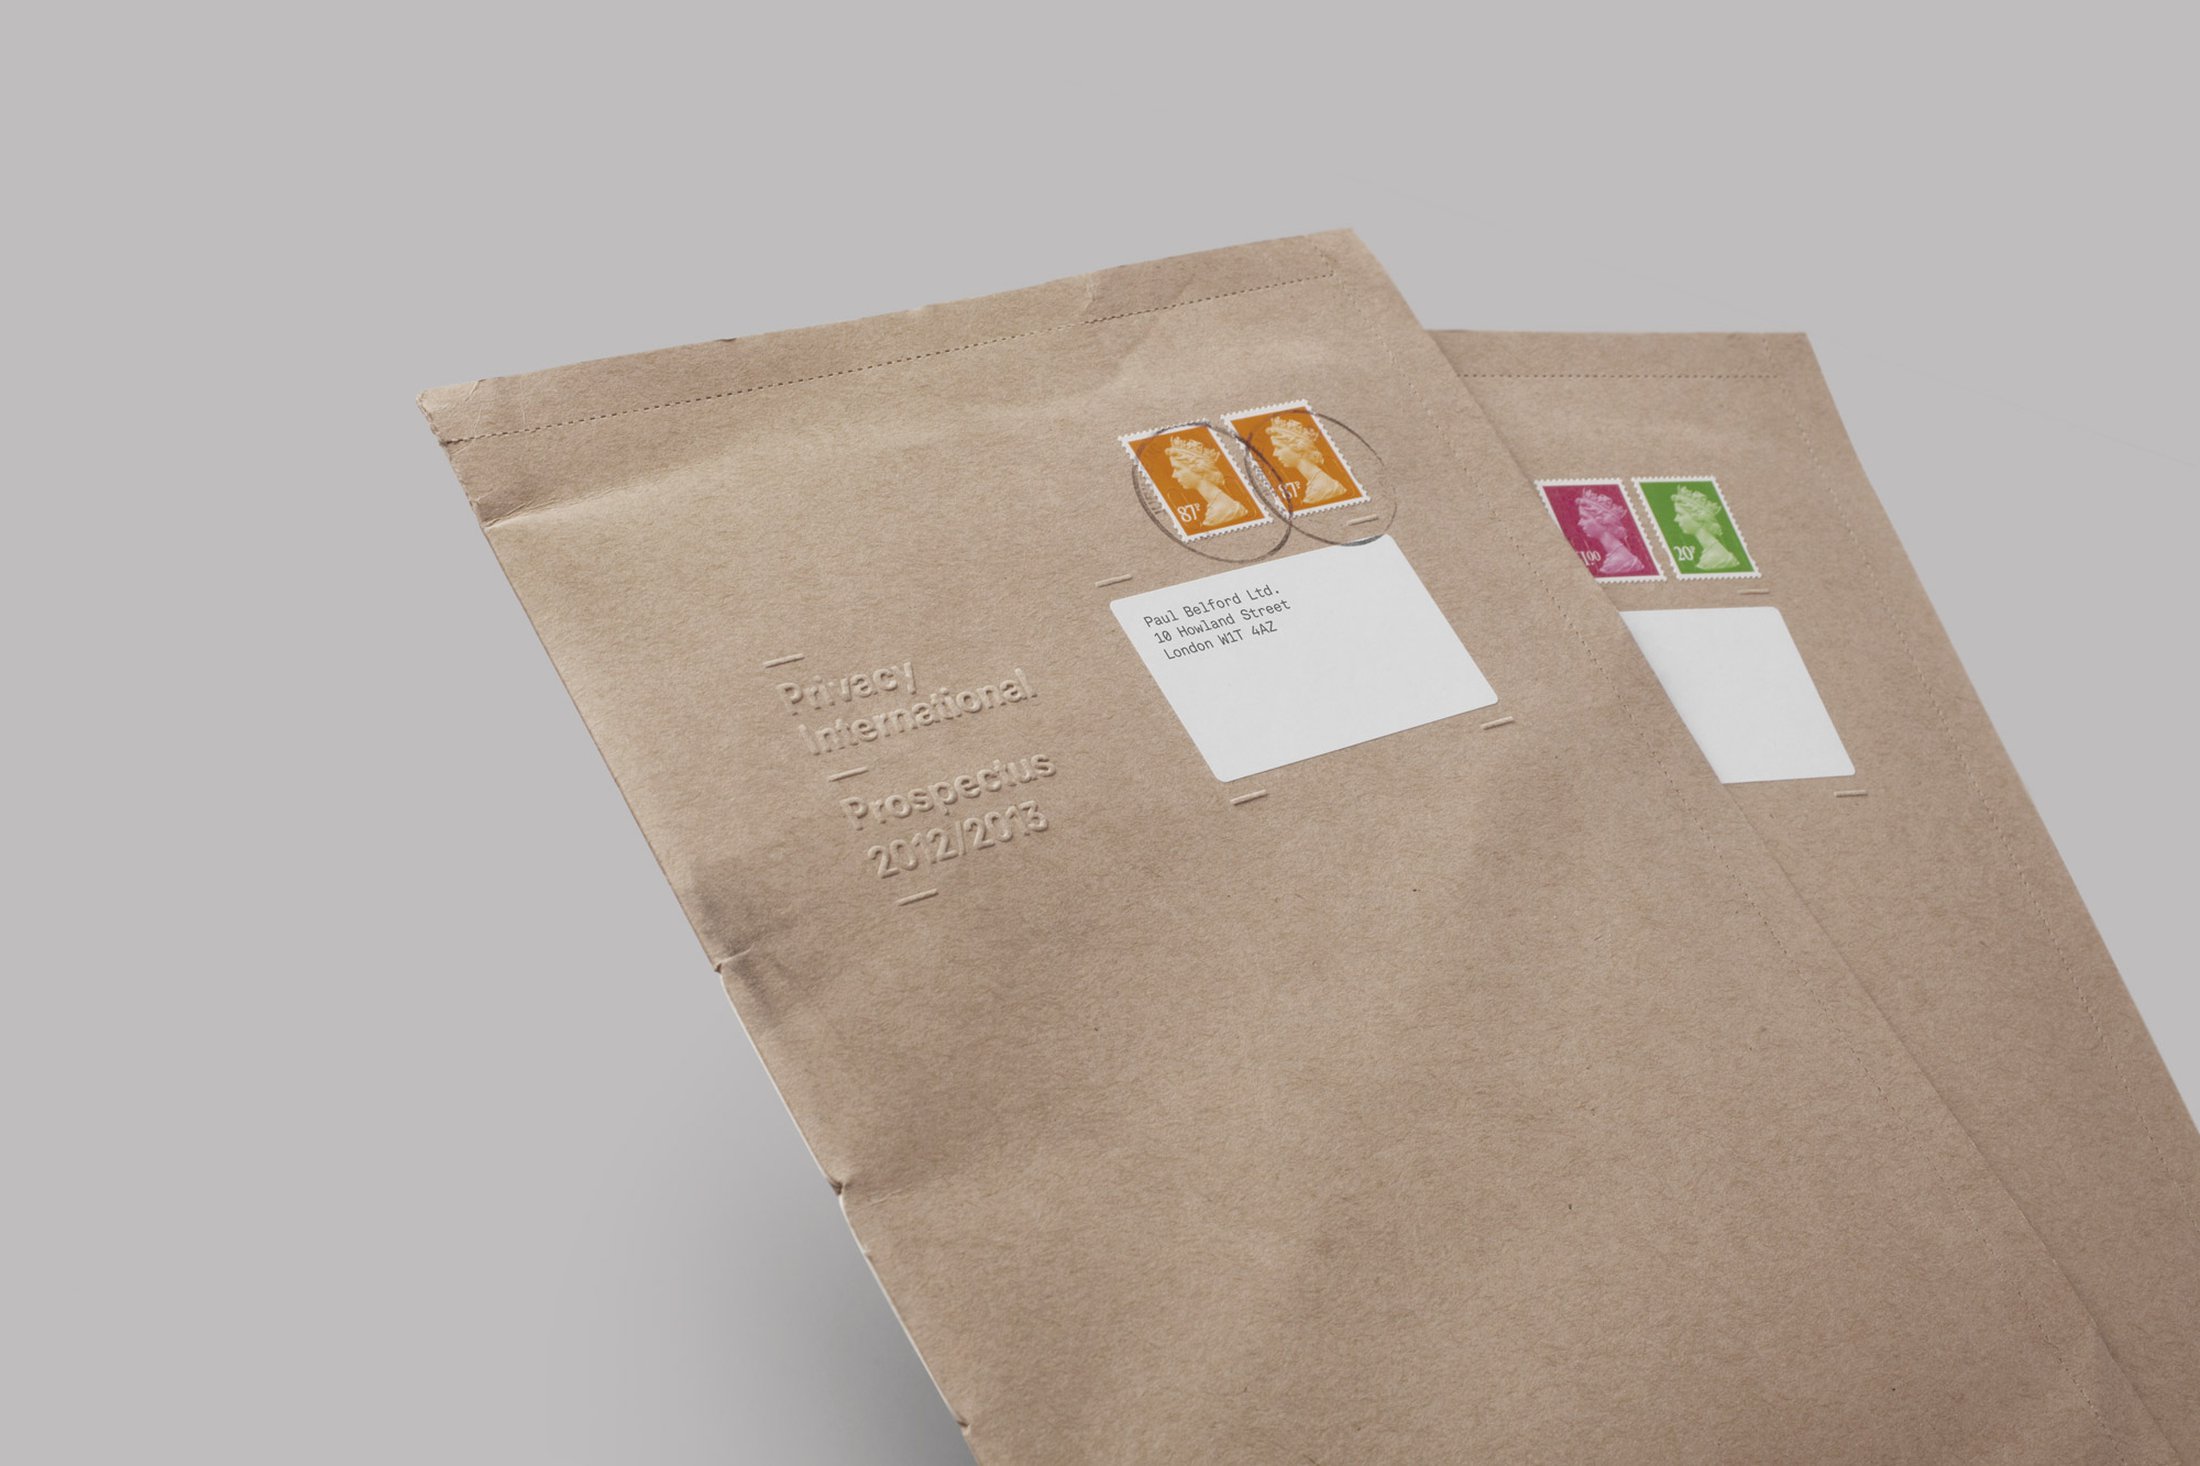 Envelope with blind emboss and perforated detail for Privacy International designed by This Is Real Art